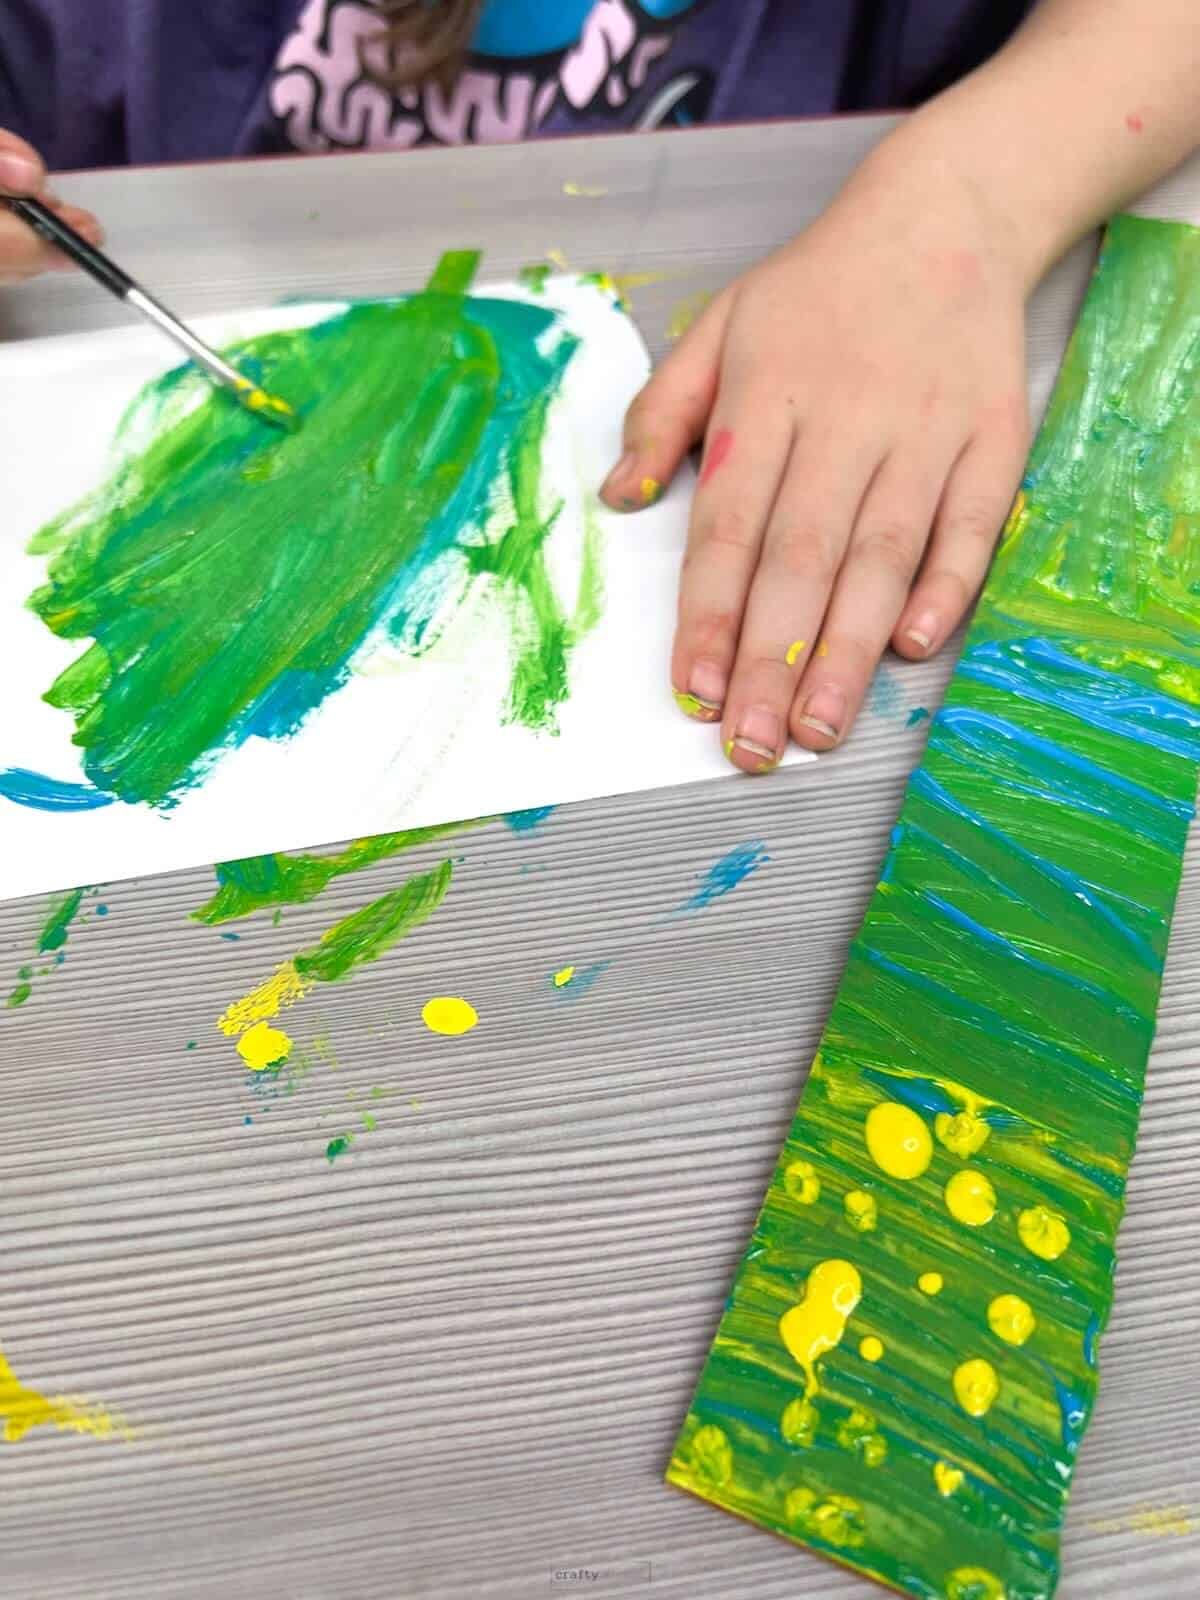 child's hand holding brush painting green and some patterns.